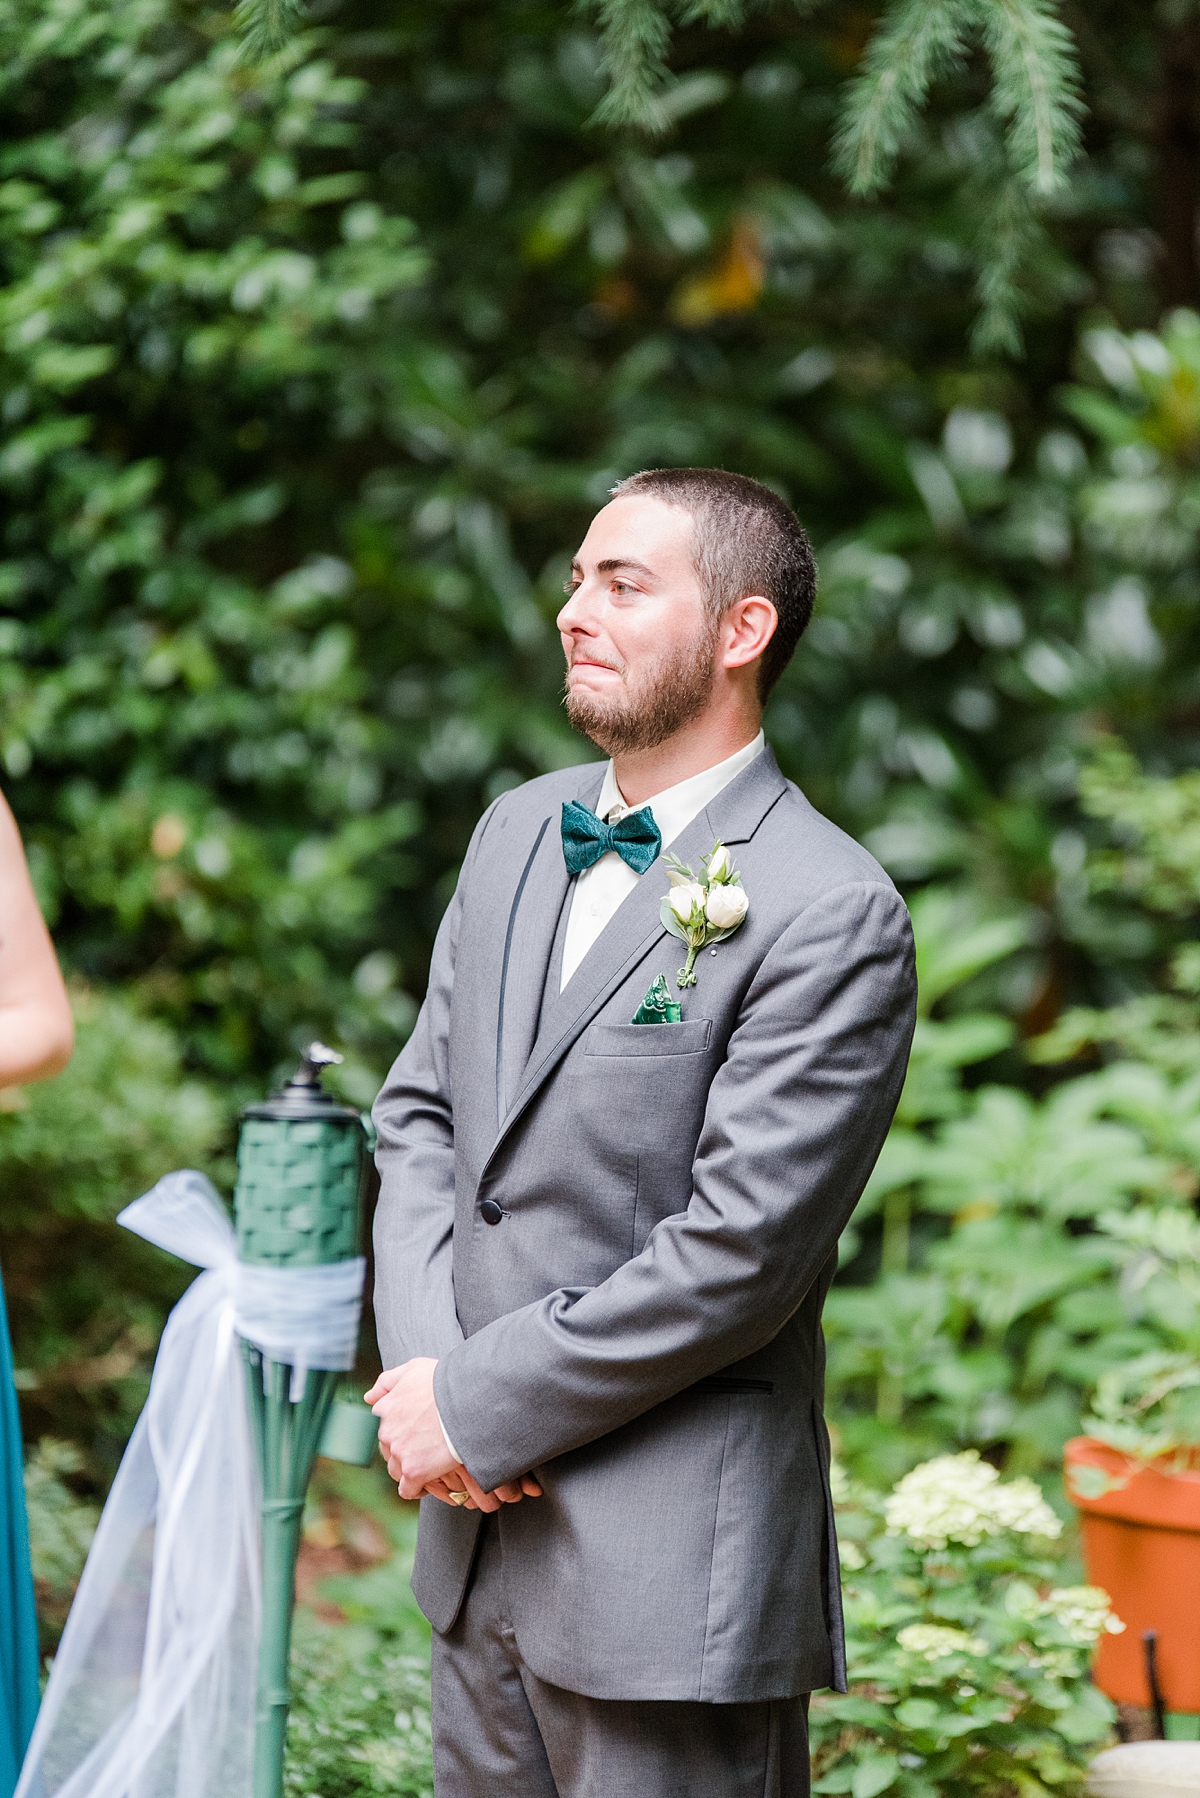 Groom's Reaction to the Bride at Yorktown Backyard Intimate Wedding Ceremony. Wedding Photography by Yorktown Wedding Photographer Kailey Brianne Photography. 